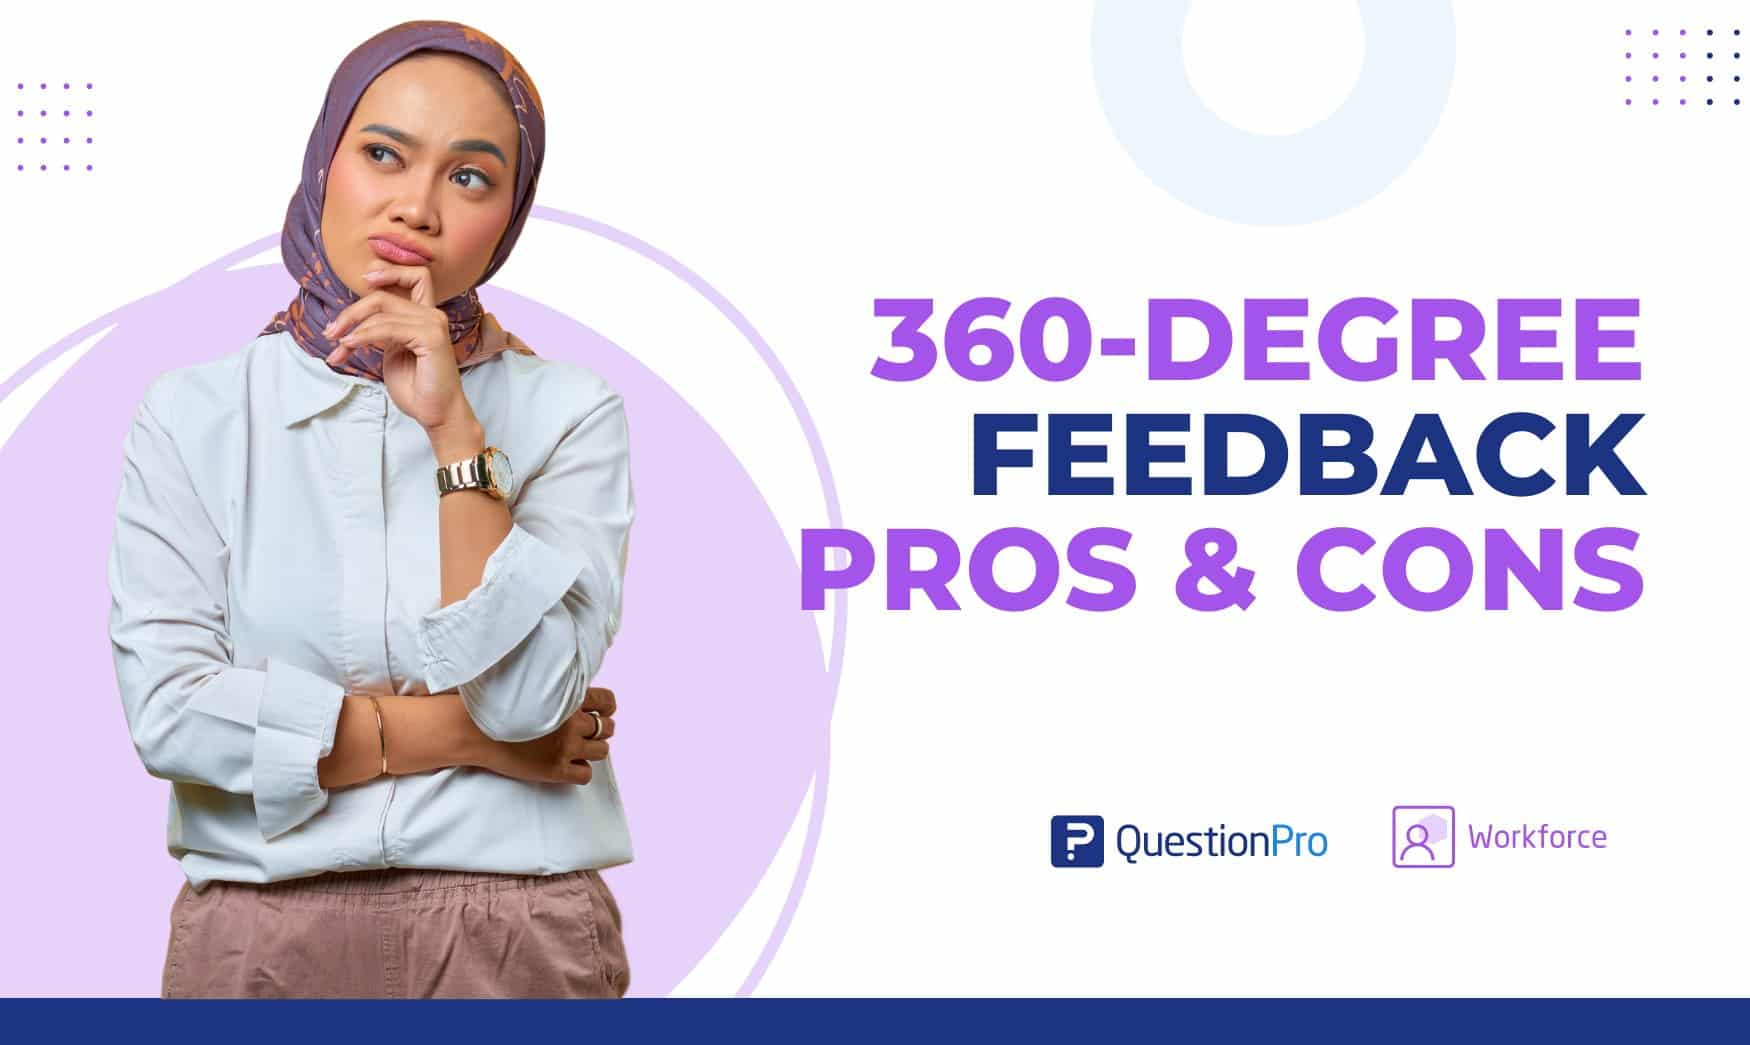 The Power of 360-Degree Feedback Explored: Let's talk about the pros, the cons and the way to overcome obstacles for your feedback.